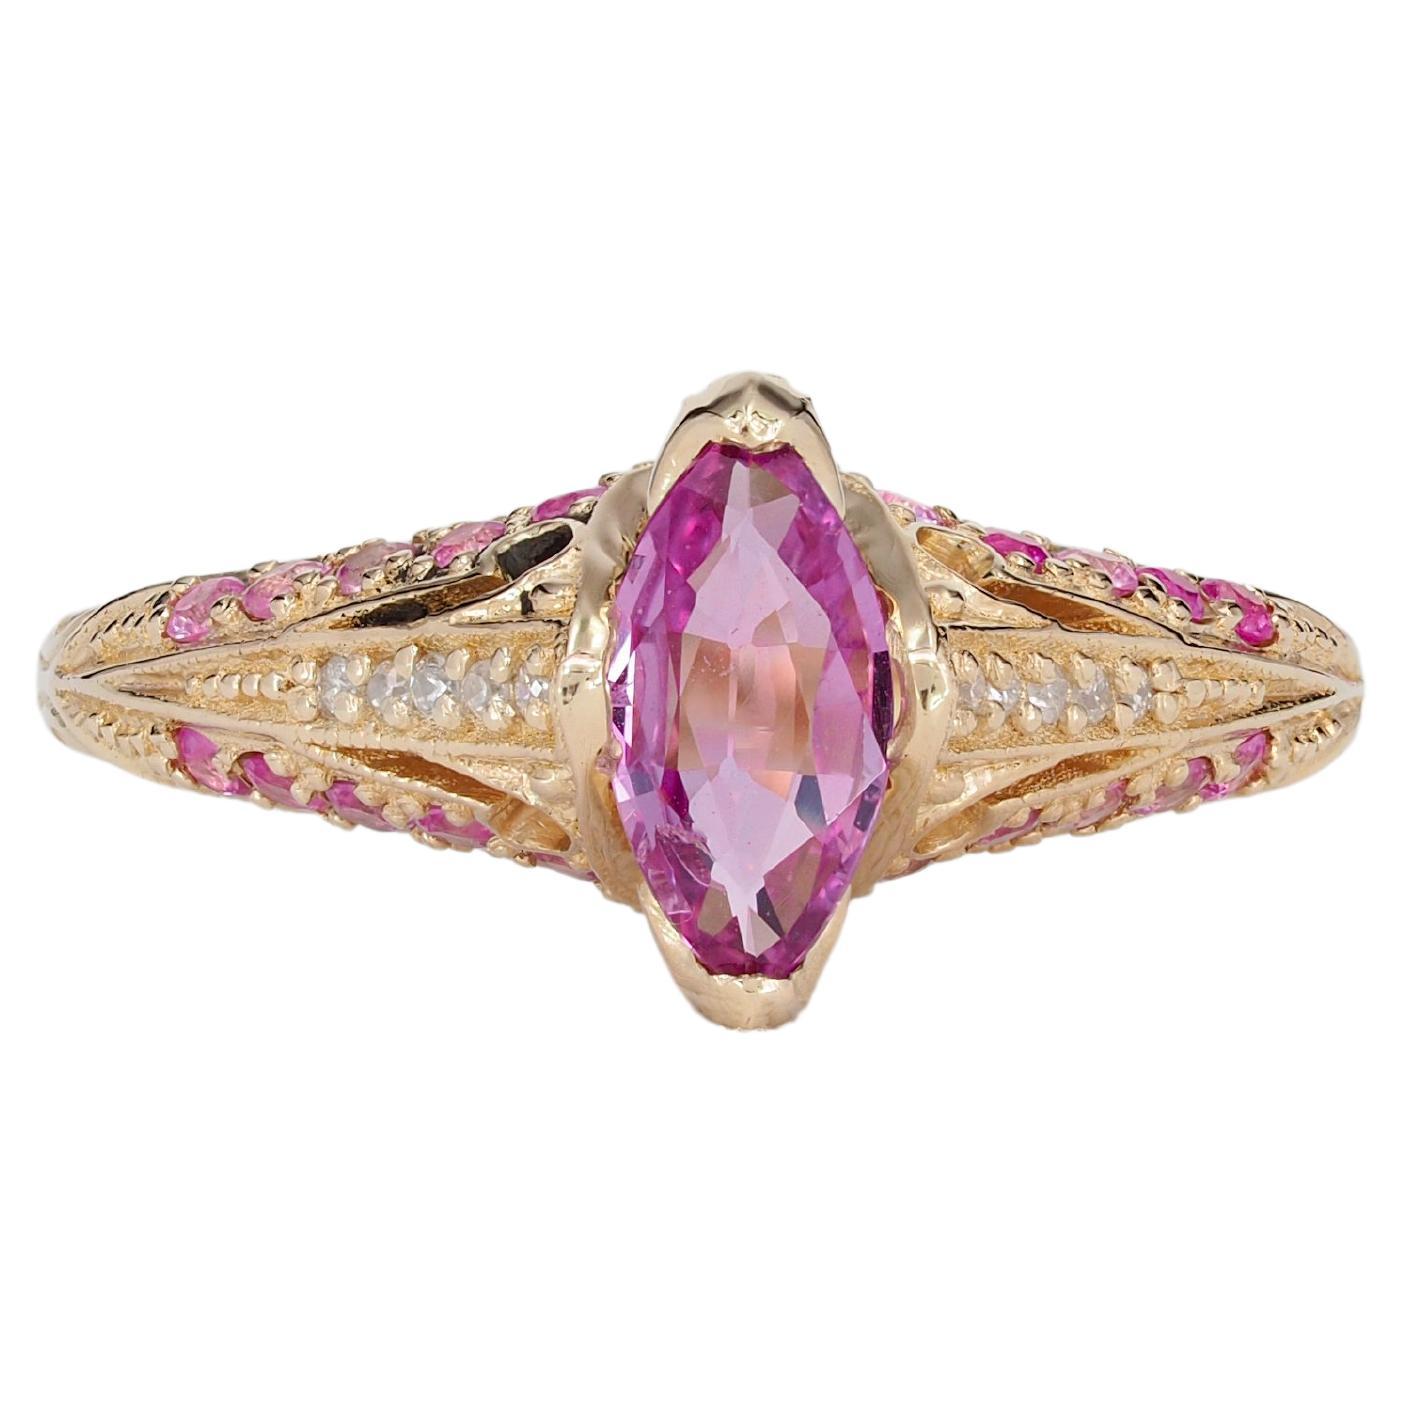 For Sale:  14k gold ring with pink sapphire. Marquise sapphire ring